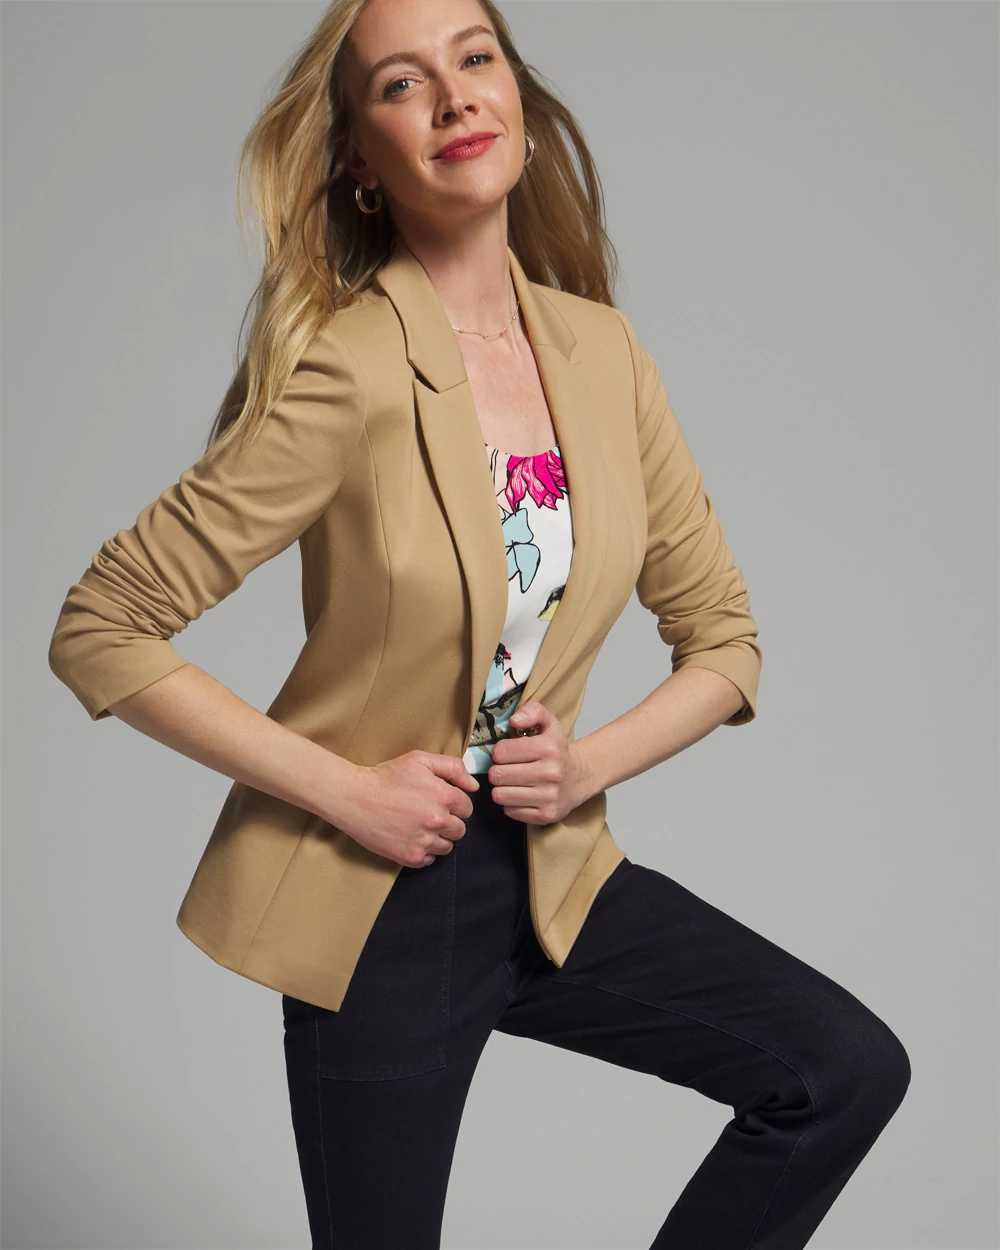 Outlet WHBM Long Sleeve Everyday Knit Blazer click to view larger image.